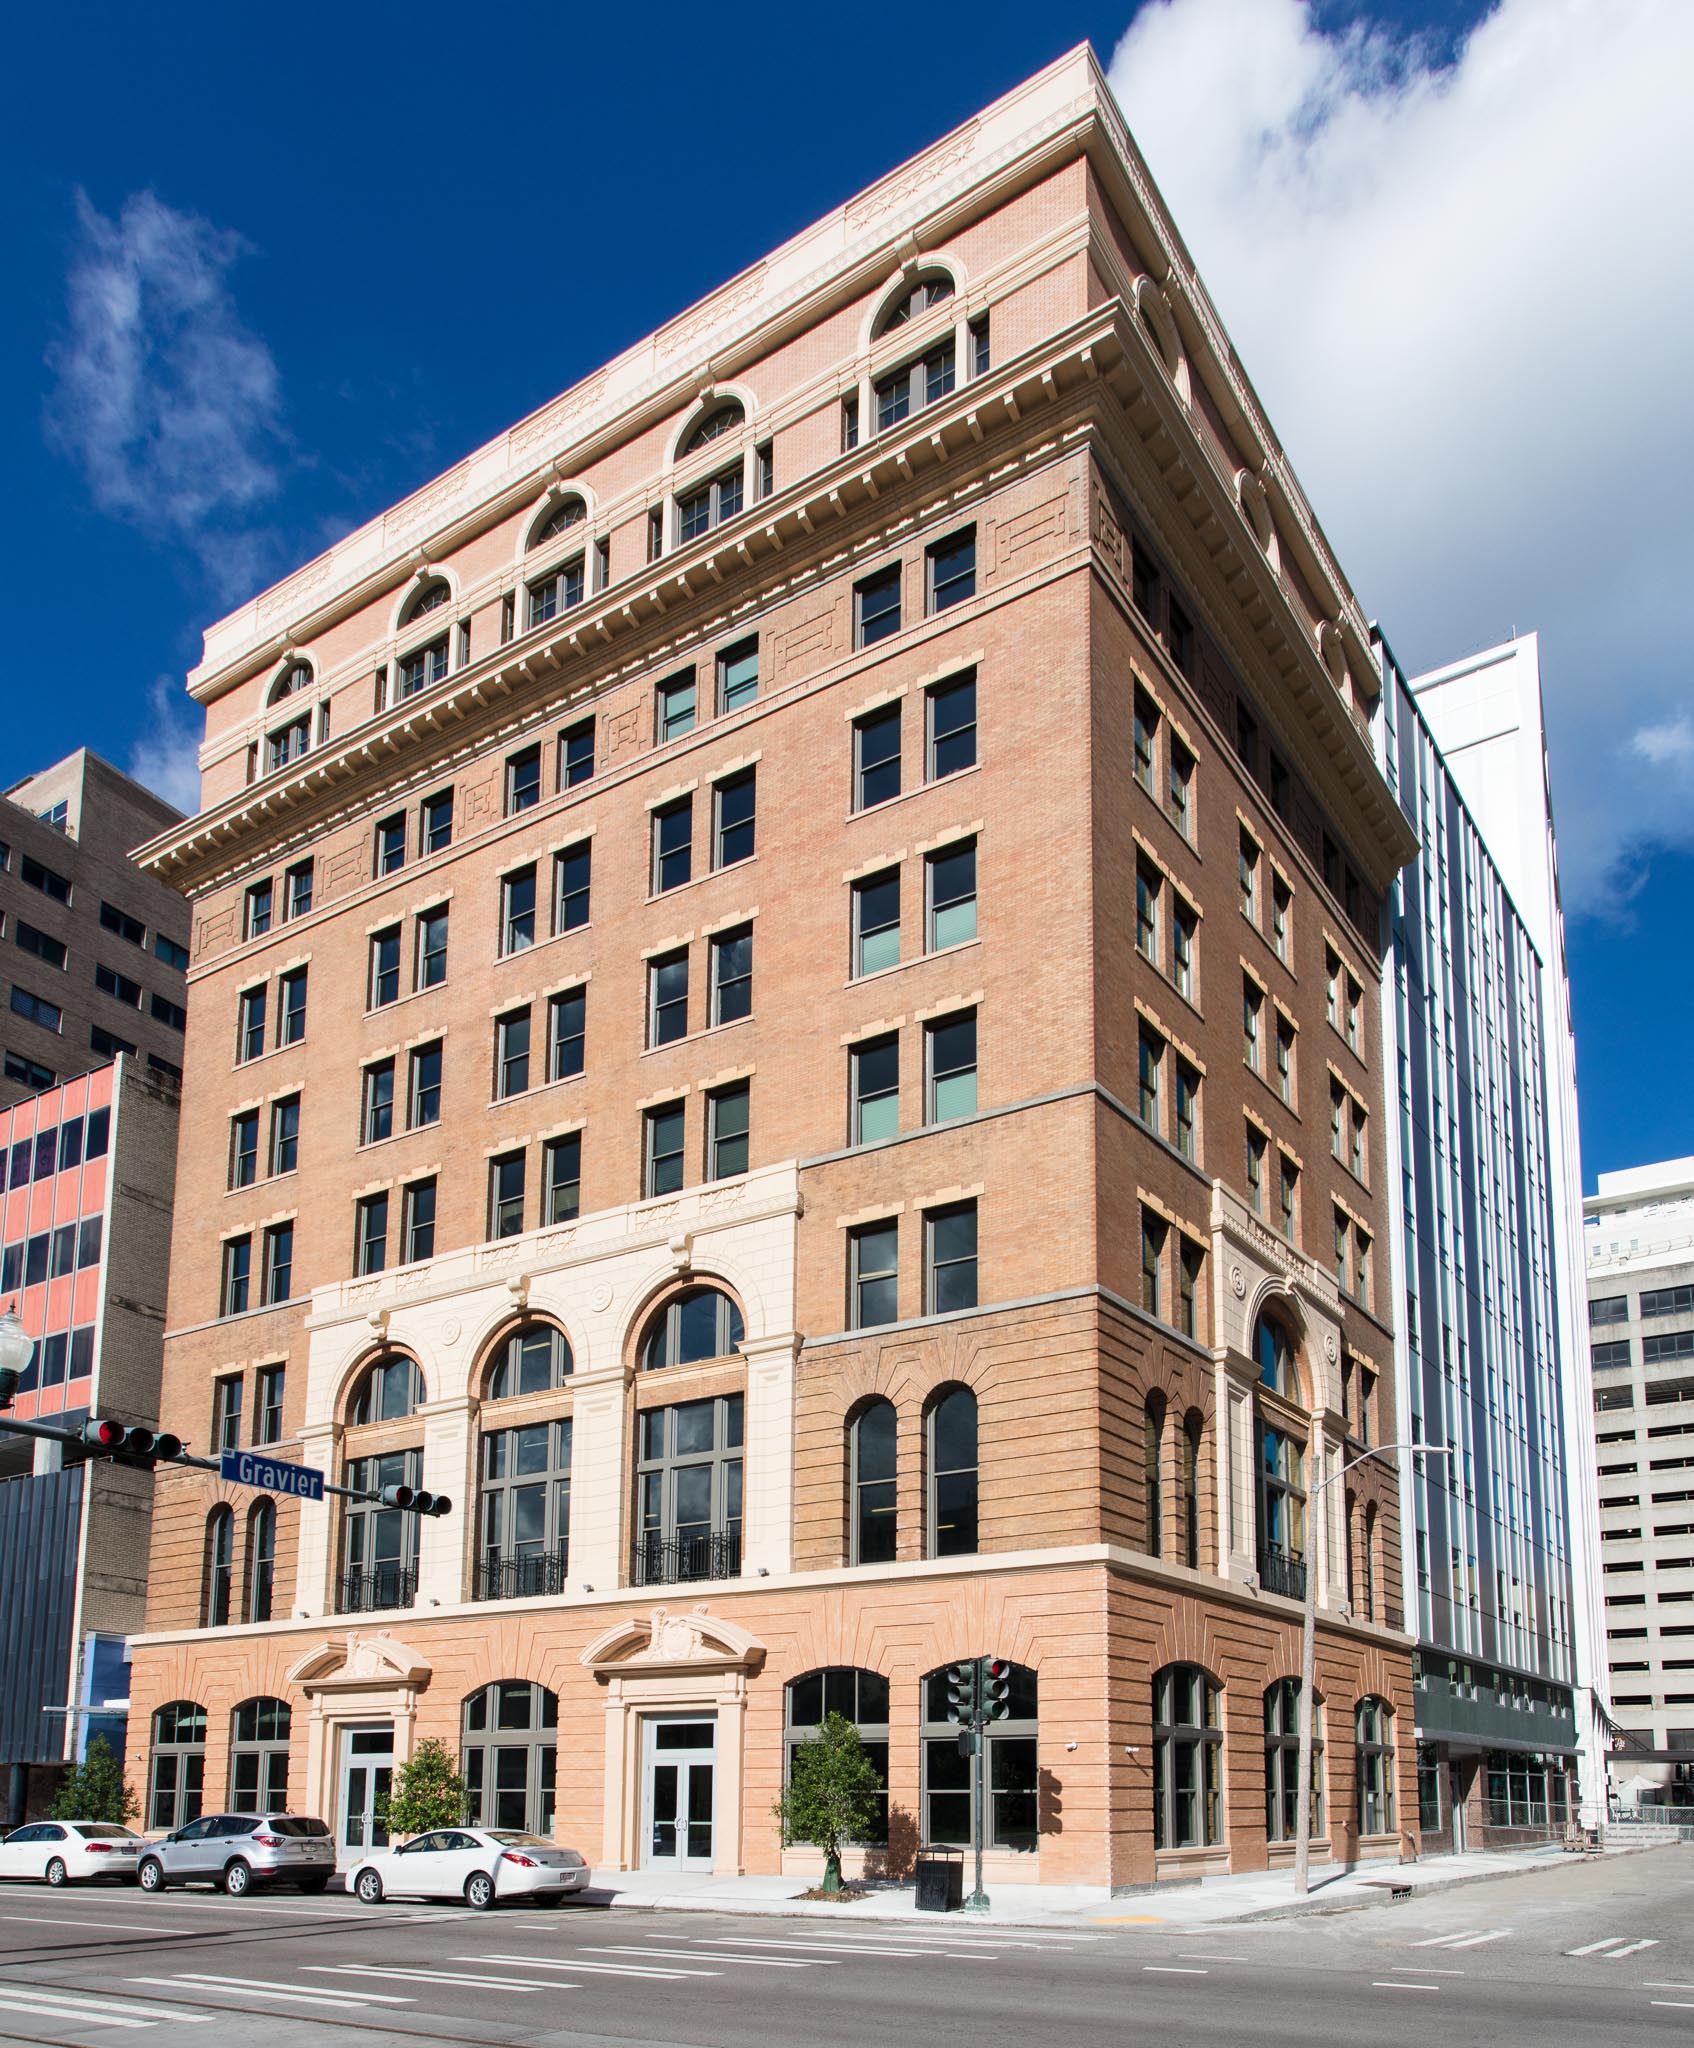 The Pythian Apartments celebrate New Orleans’ past while being a part of its promising future